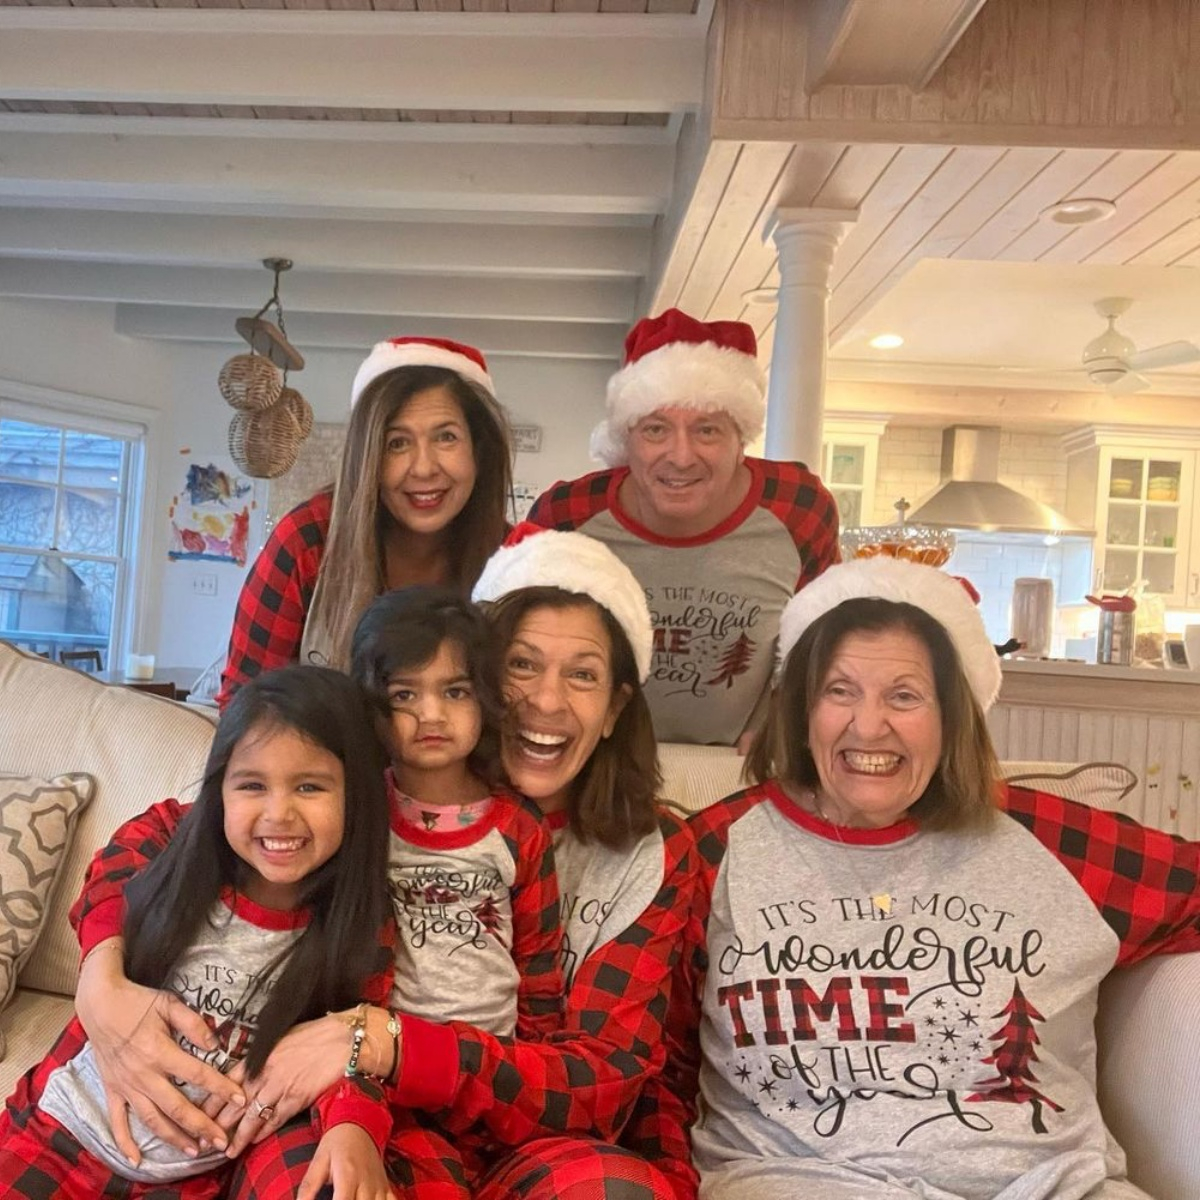 Photos from Celebrity Families Wearing Matching Holiday Pajamas